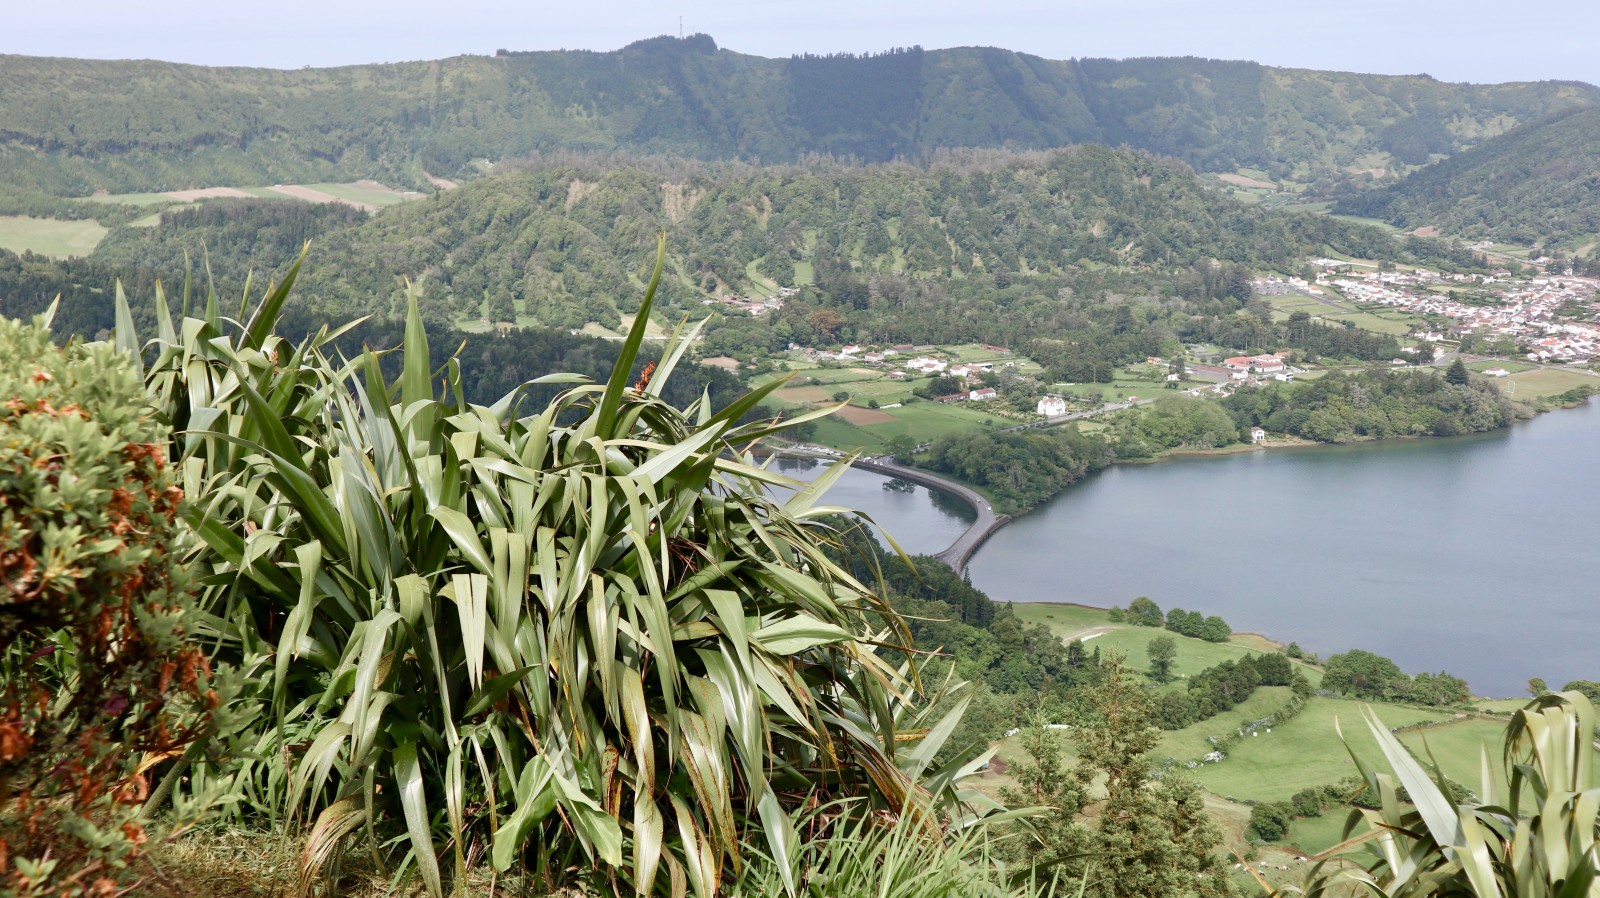 Azores travel guide. 